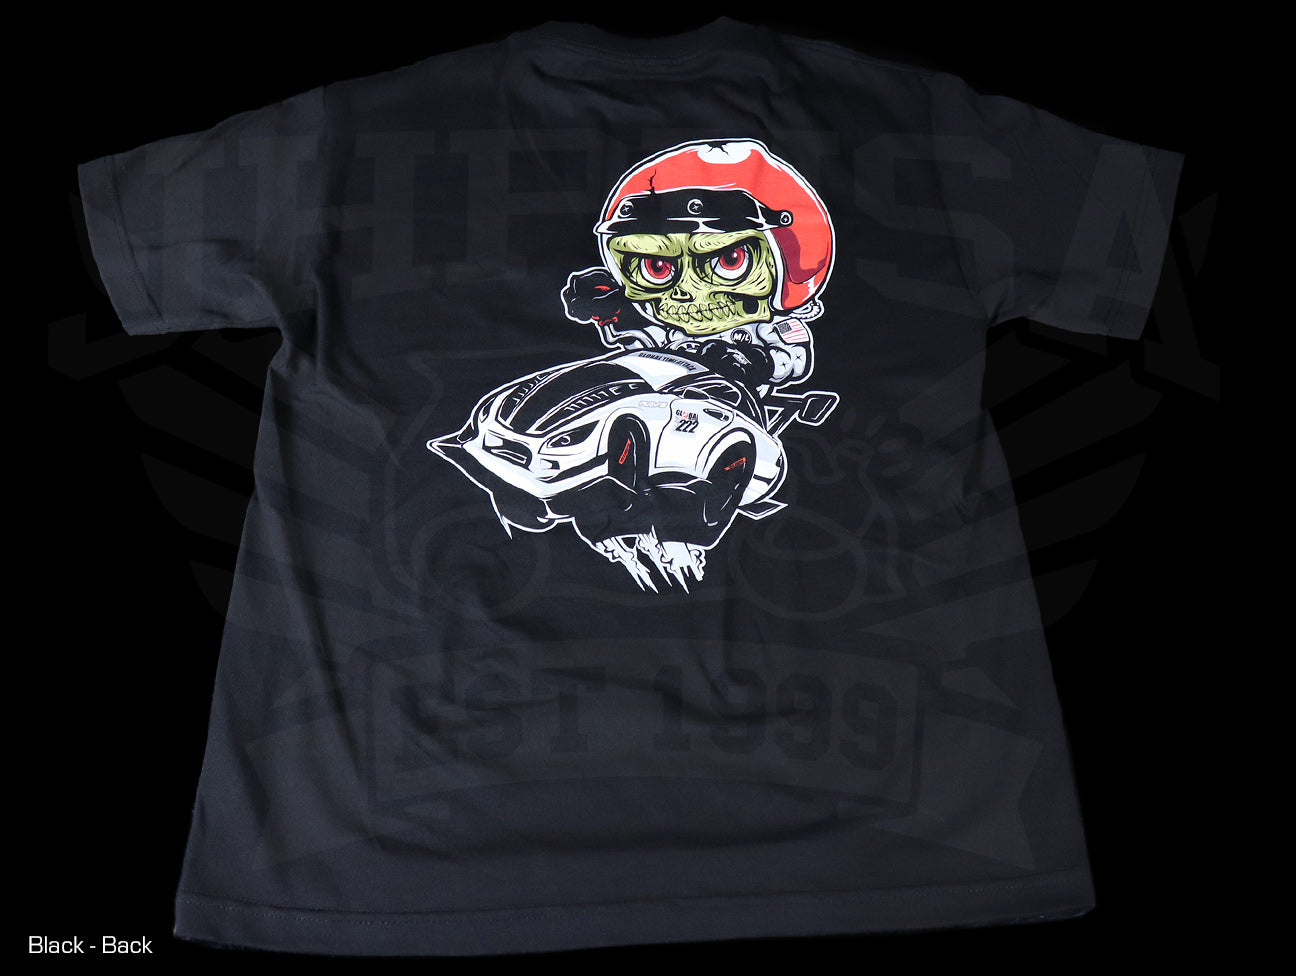 Motolyric Time Attack Division Tee